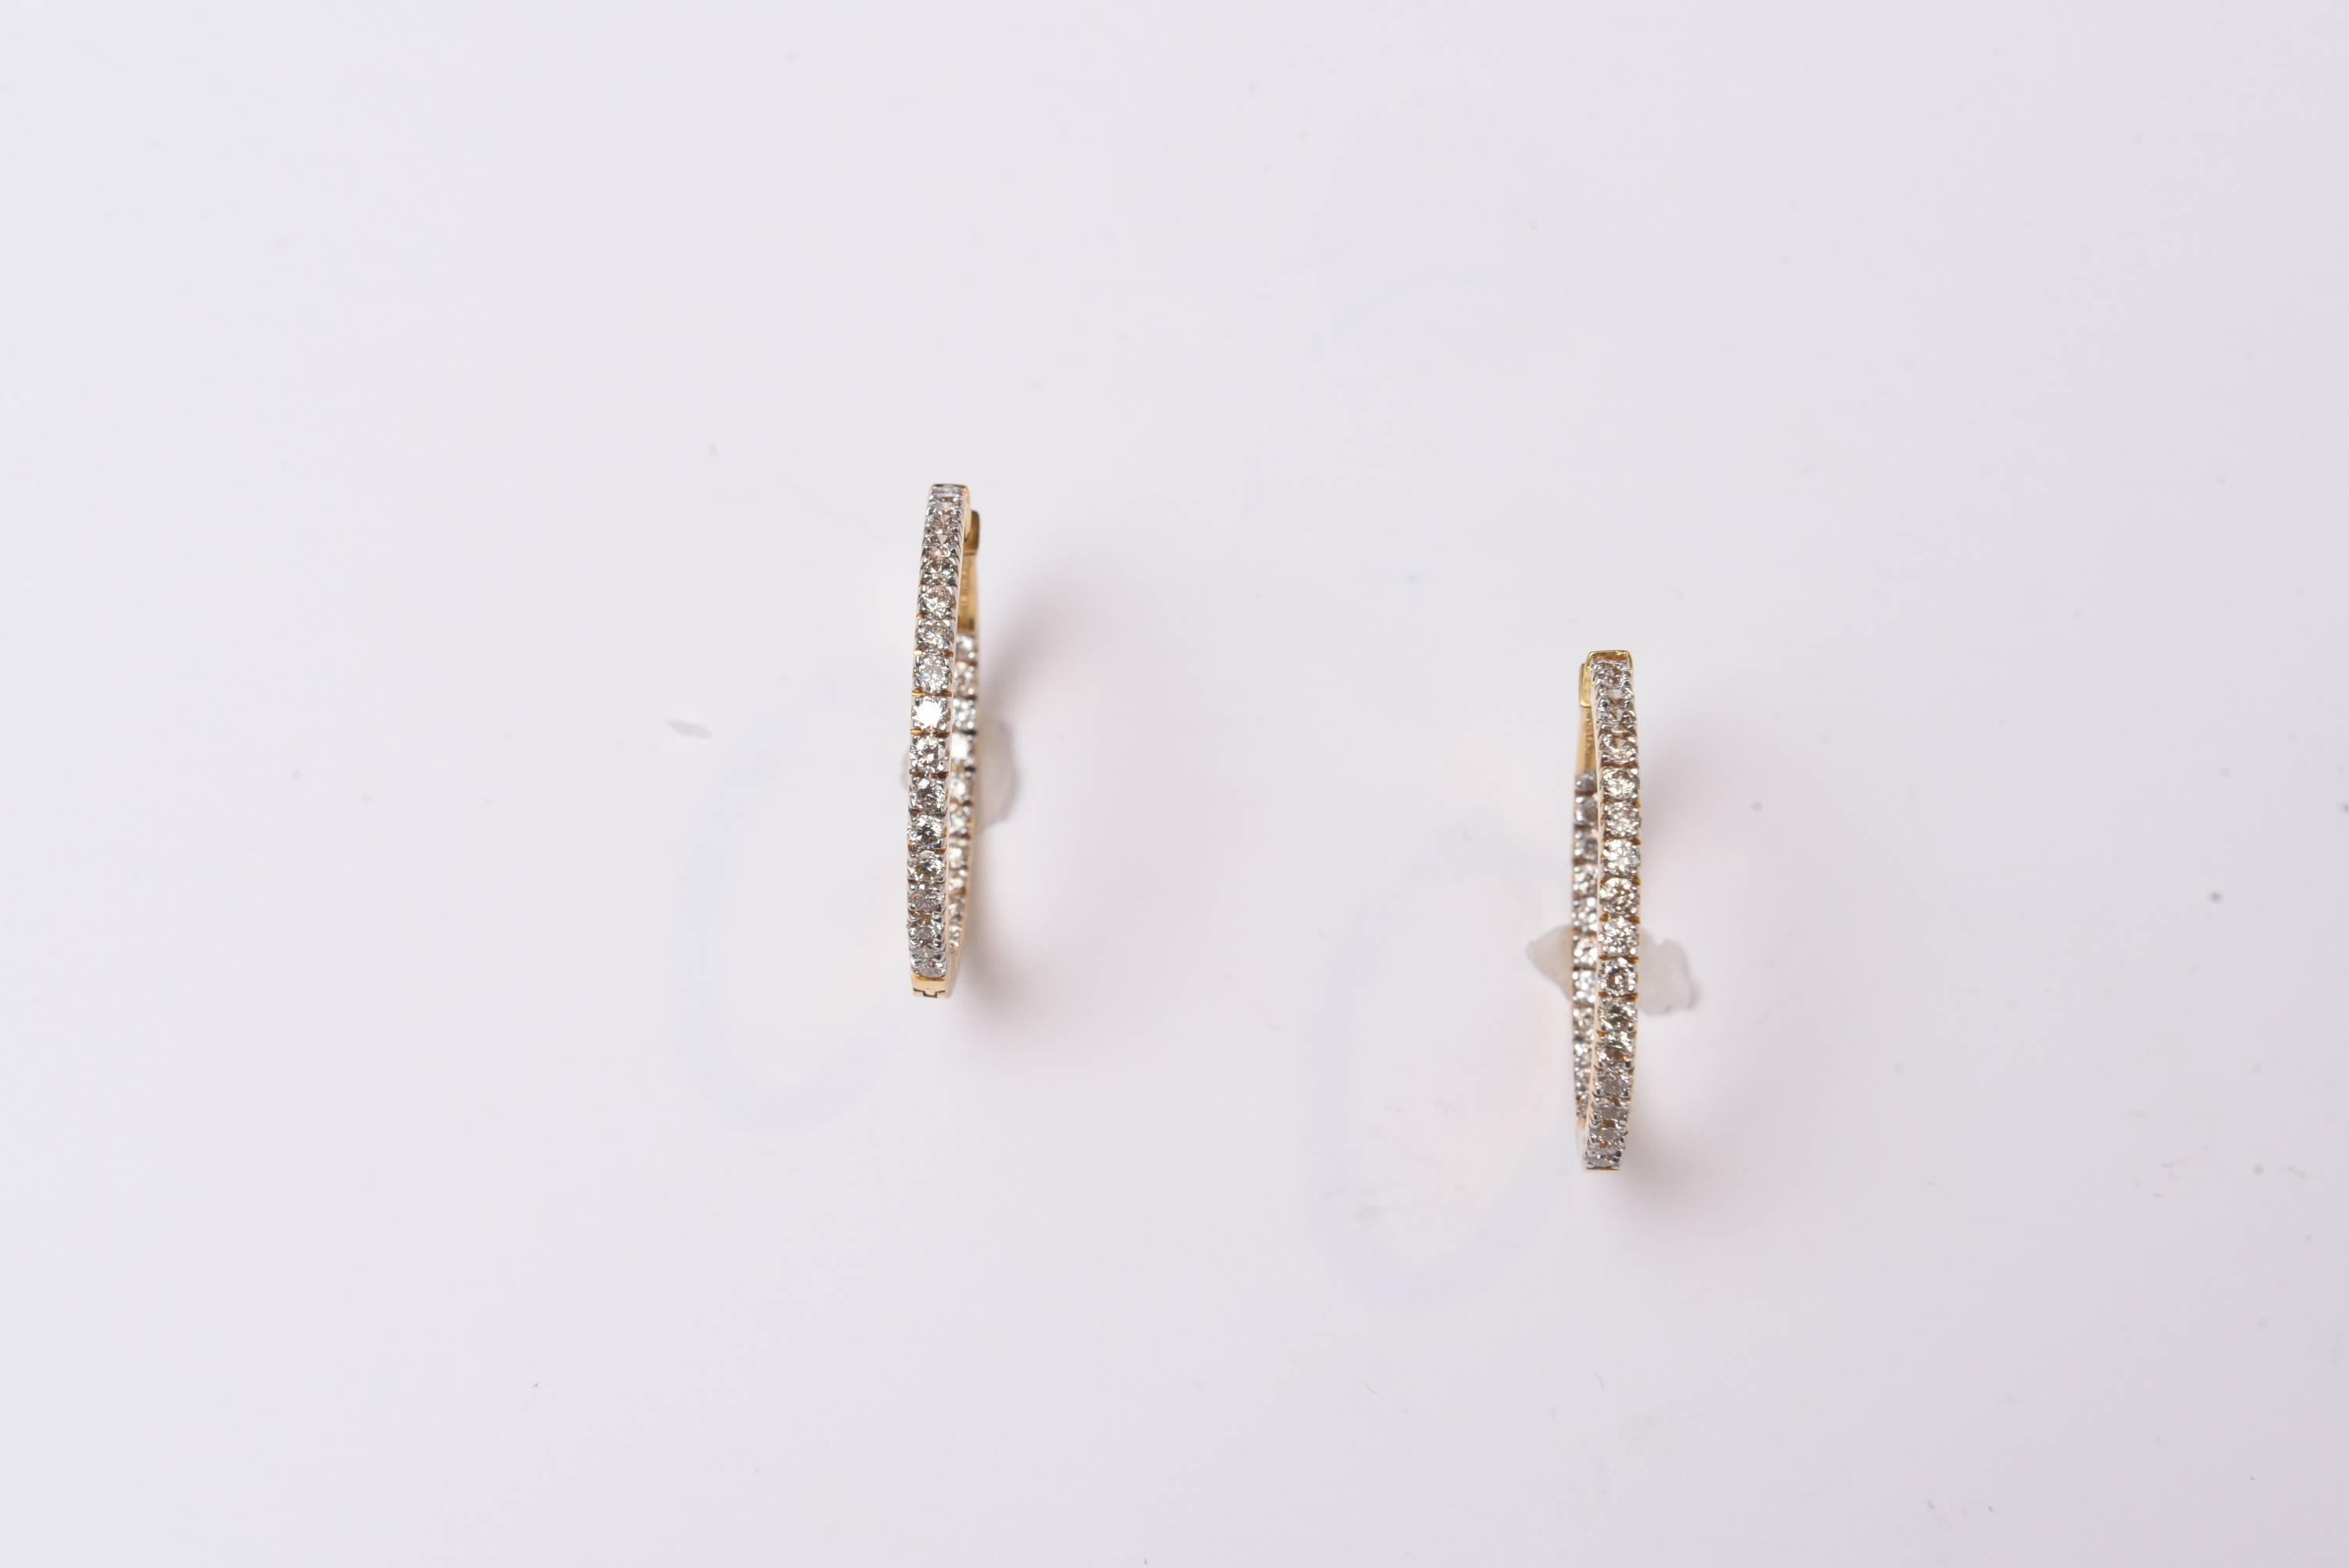 Lovely and classic 18K gold inside out hoops with diamonds set both along the front of the hoop and on the inside for a double row and dimensional affect of diamonds as you wear them.  Nice push clasp closure for pierced ears.  2.8 carats of diamonds